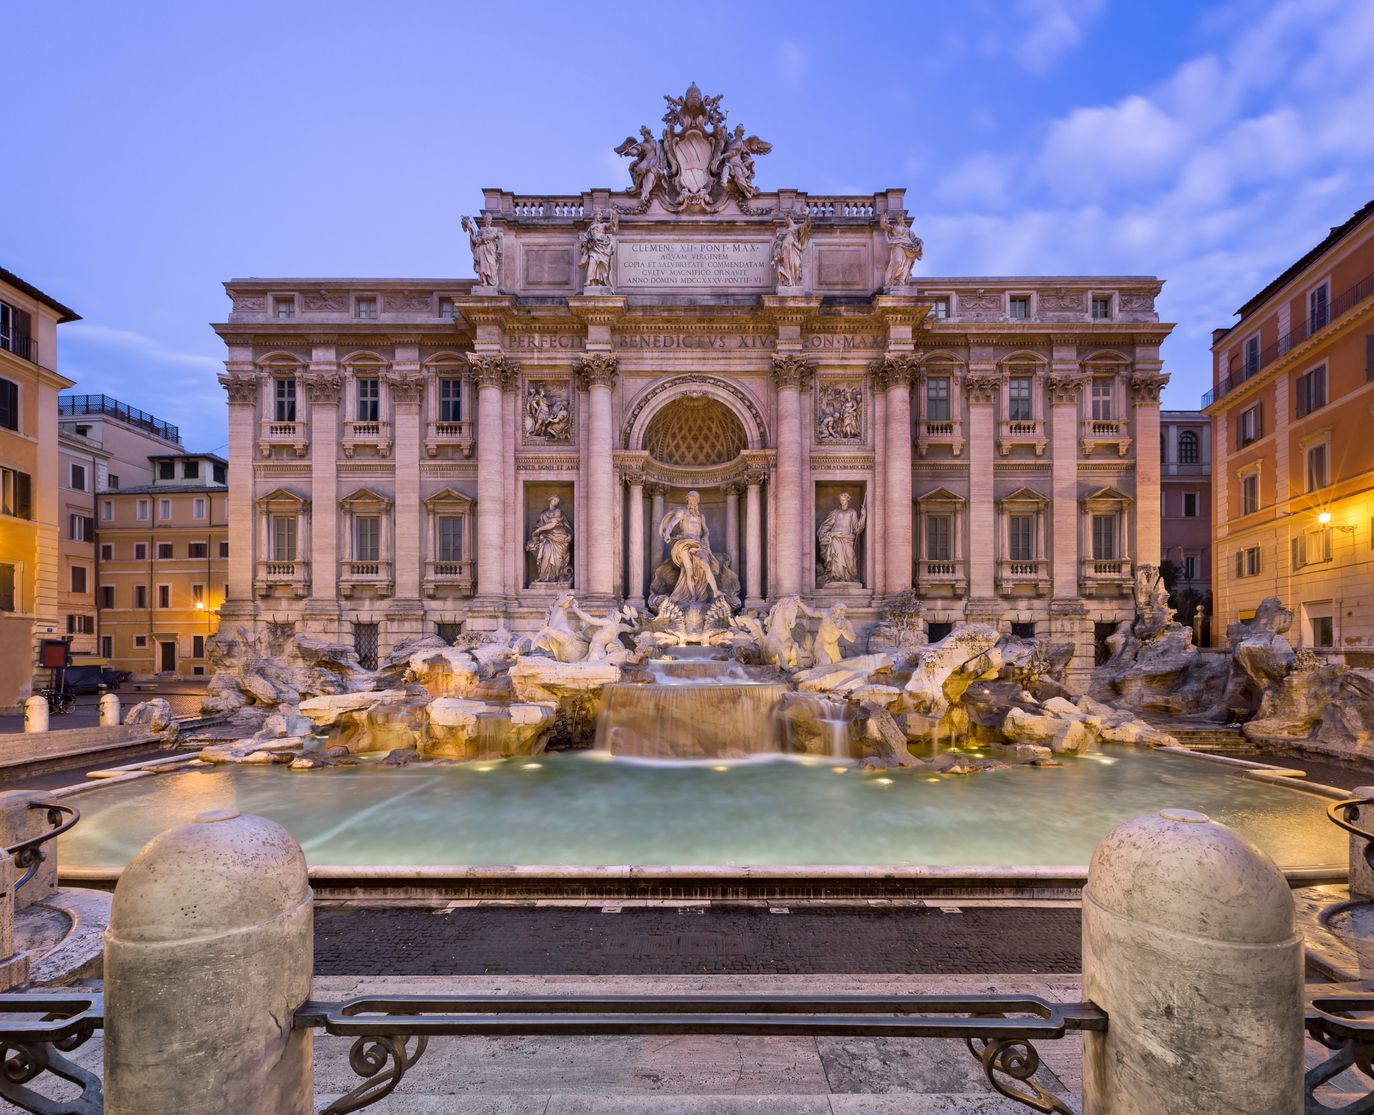 Trevi Fountain, unmissable site in Rome